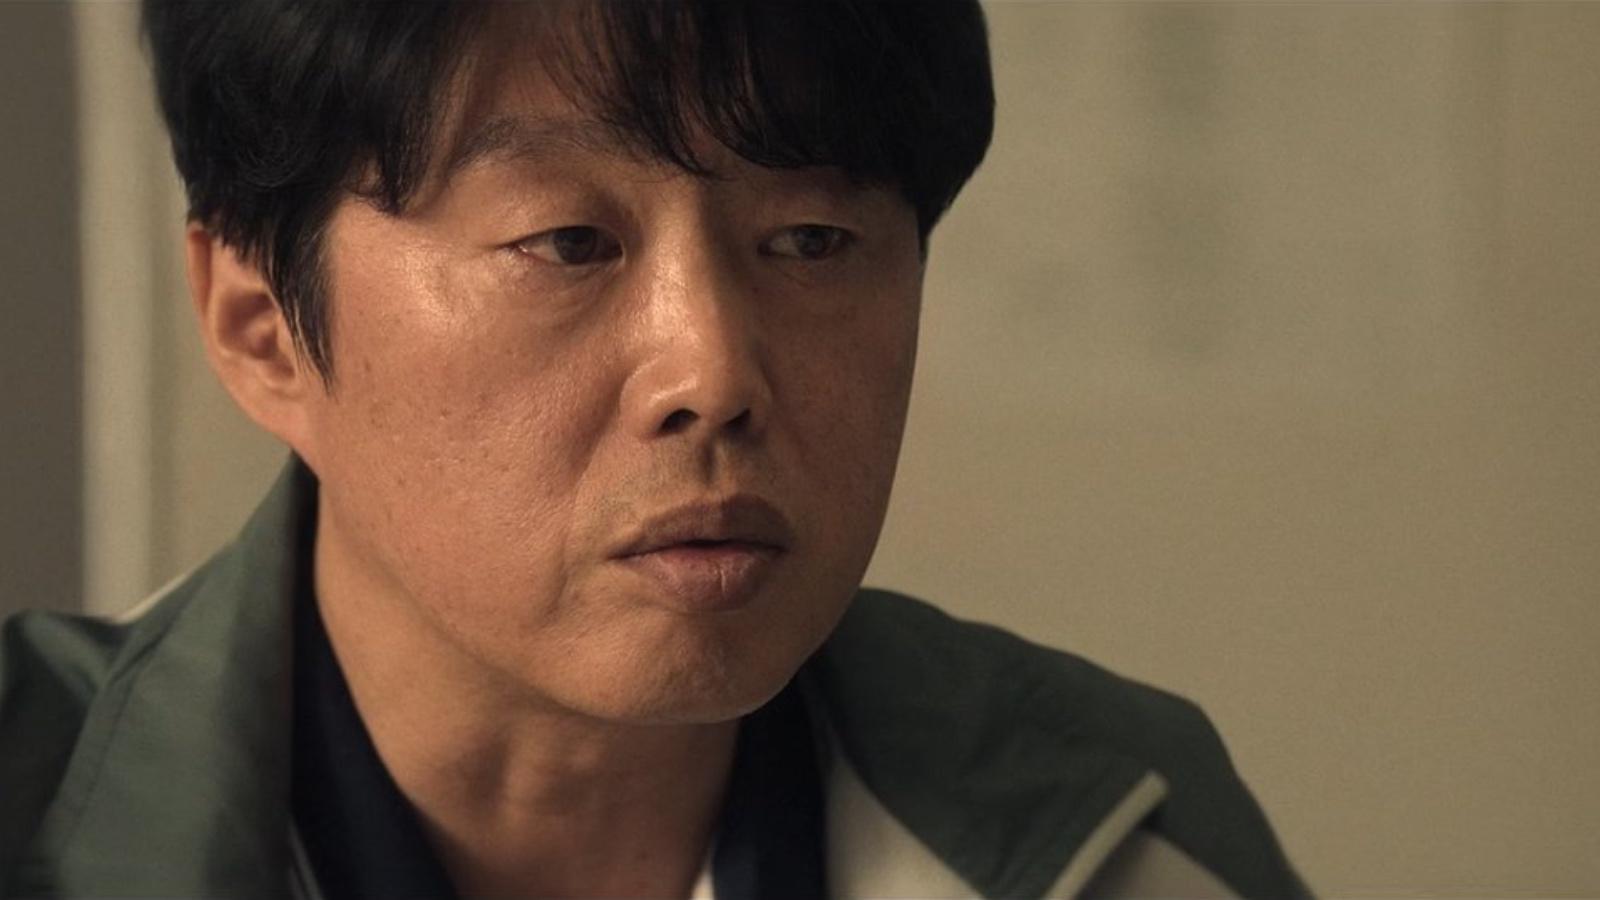 Moving character Il-hwan in Episode 16